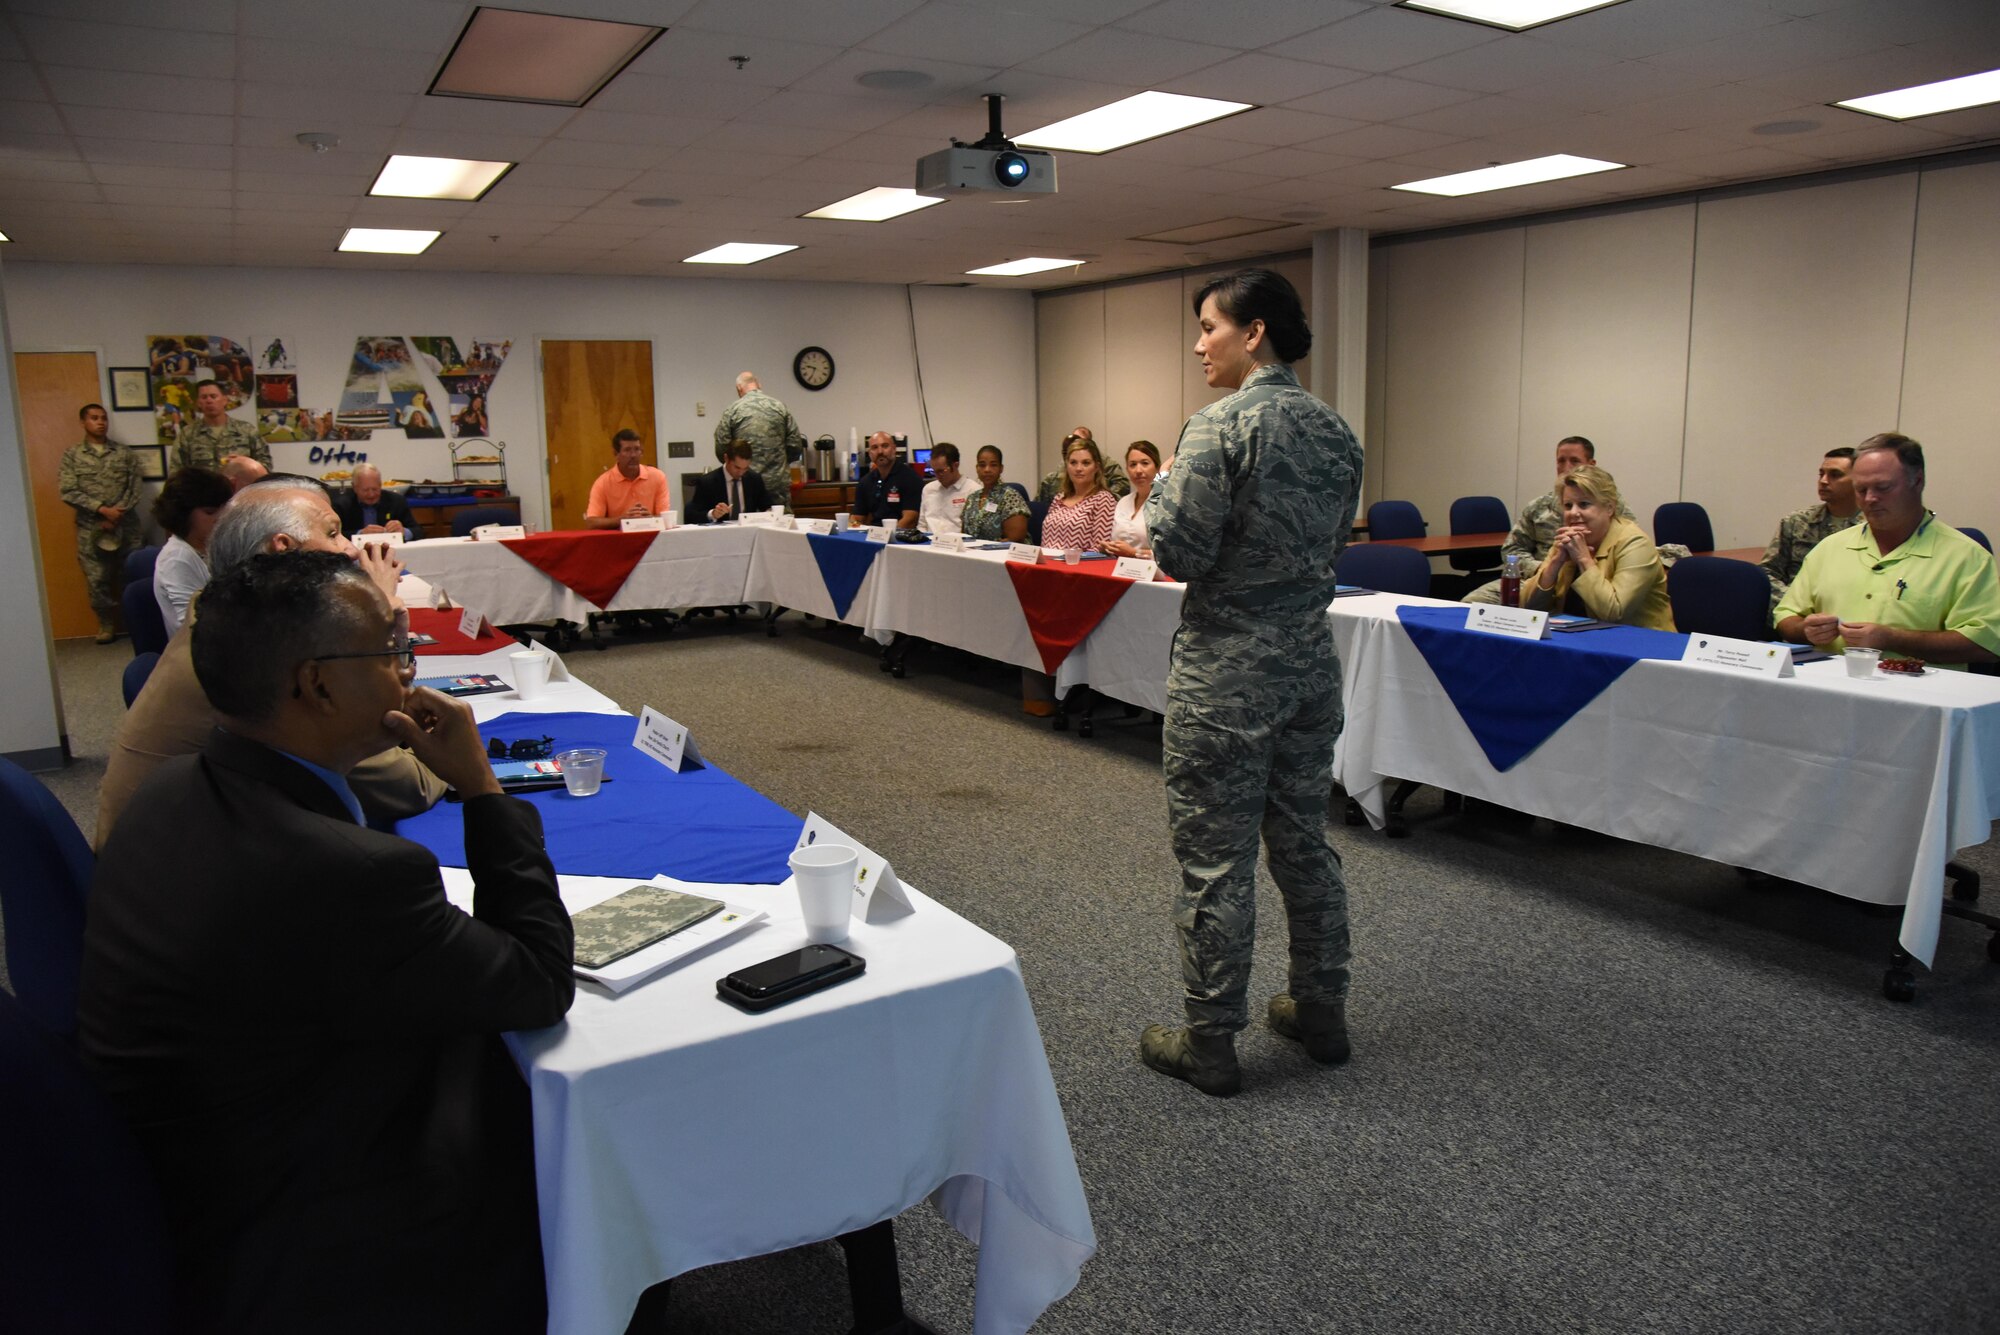 Col. Debra Lovette, 81st Training Wing commander, delivers welcoming remarks during an honorary commanders 81st Mission Support Group orientation tour in the Sablich Center Aug. 10, 2017, on Keesler Air Force Base, Miss. The honorary commander program is a partnership between base leadership and local civic leaders to promote strong ties between military and civilian leaders. (U.S. Air Force photo by Kemberly Groue)